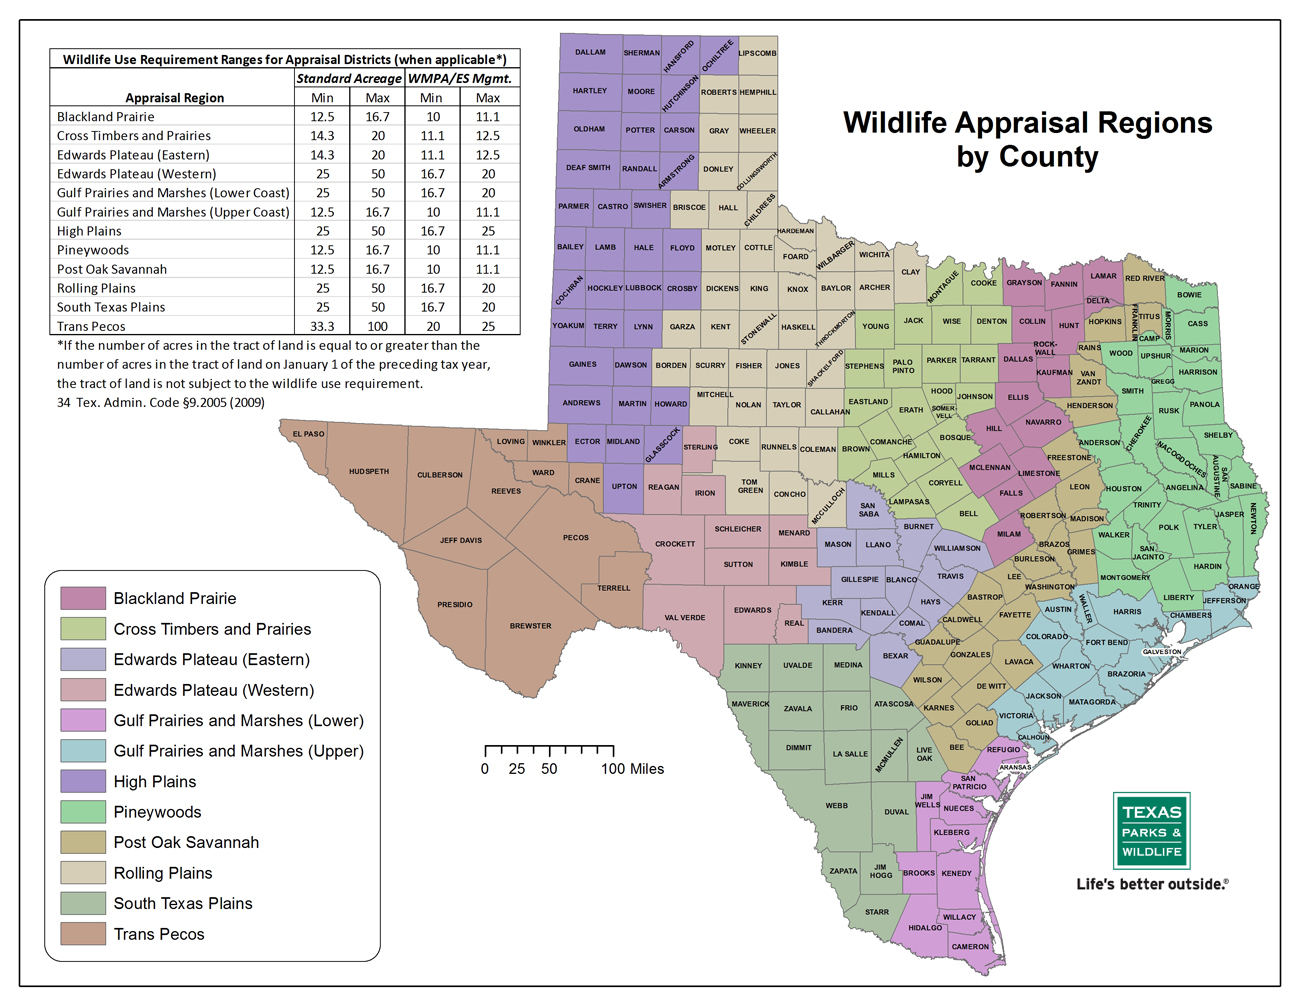 Map of Wildlife Appraisal Regions by County